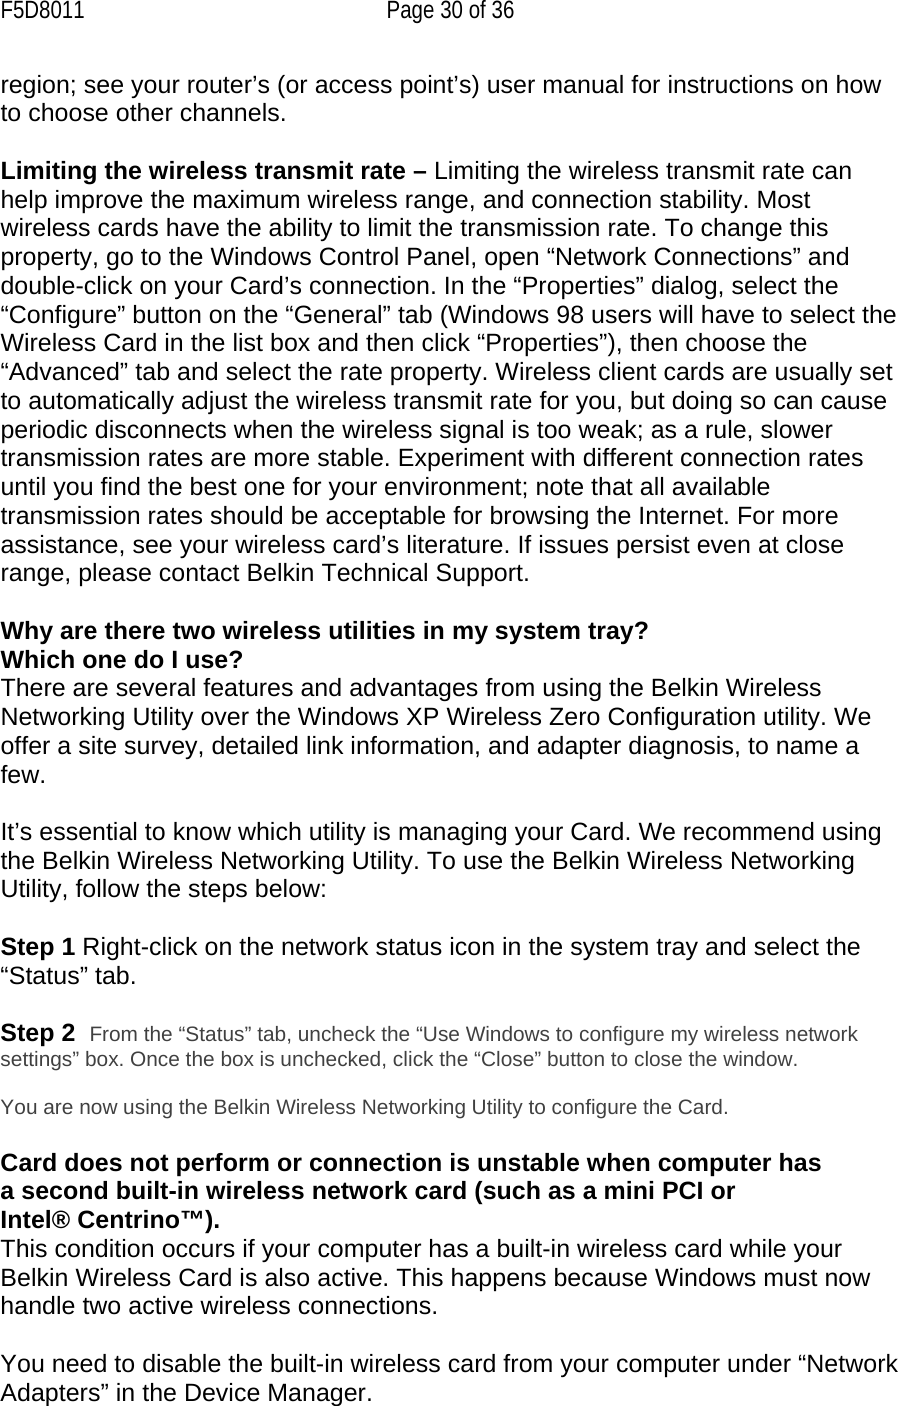 F5D8011  Page 30 of 36 region; see your router’s (or access point’s) user manual for instructions on how to choose other channels.  Limiting the wireless transmit rate – Limiting the wireless transmit rate can help improve the maximum wireless range, and connection stability. Most wireless cards have the ability to limit the transmission rate. To change this property, go to the Windows Control Panel, open “Network Connections” and double-click on your Card’s connection. In the “Properties” dialog, select the “Configure” button on the “General” tab (Windows 98 users will have to select the Wireless Card in the list box and then click “Properties”), then choose the “Advanced” tab and select the rate property. Wireless client cards are usually set to automatically adjust the wireless transmit rate for you, but doing so can cause periodic disconnects when the wireless signal is too weak; as a rule, slower transmission rates are more stable. Experiment with different connection rates until you find the best one for your environment; note that all available transmission rates should be acceptable for browsing the Internet. For more assistance, see your wireless card’s literature. If issues persist even at close range, please contact Belkin Technical Support.  Why are there two wireless utilities in my system tray? Which one do I use? There are several features and advantages from using the Belkin Wireless Networking Utility over the Windows XP Wireless Zero Configuration utility. We offer a site survey, detailed link information, and adapter diagnosis, to name a few.   It’s essential to know which utility is managing your Card. We recommend using the Belkin Wireless Networking Utility. To use the Belkin Wireless Networking Utility, follow the steps below:  Step 1 Right-click on the network status icon in the system tray and select the “Status” tab.    Step 2  From the “Status” tab, uncheck the “Use Windows to configure my wireless network settings” box. Once the box is unchecked, click the “Close” button to close the window.  You are now using the Belkin Wireless Networking Utility to configure the Card.  Card does not perform or connection is unstable when computer has a second built-in wireless network card (such as a mini PCI or Intel® Centrino™). This condition occurs if your computer has a built-in wireless card while your Belkin Wireless Card is also active. This happens because Windows must now handle two active wireless connections.  You need to disable the built-in wireless card from your computer under “Network Adapters” in the Device Manager. 